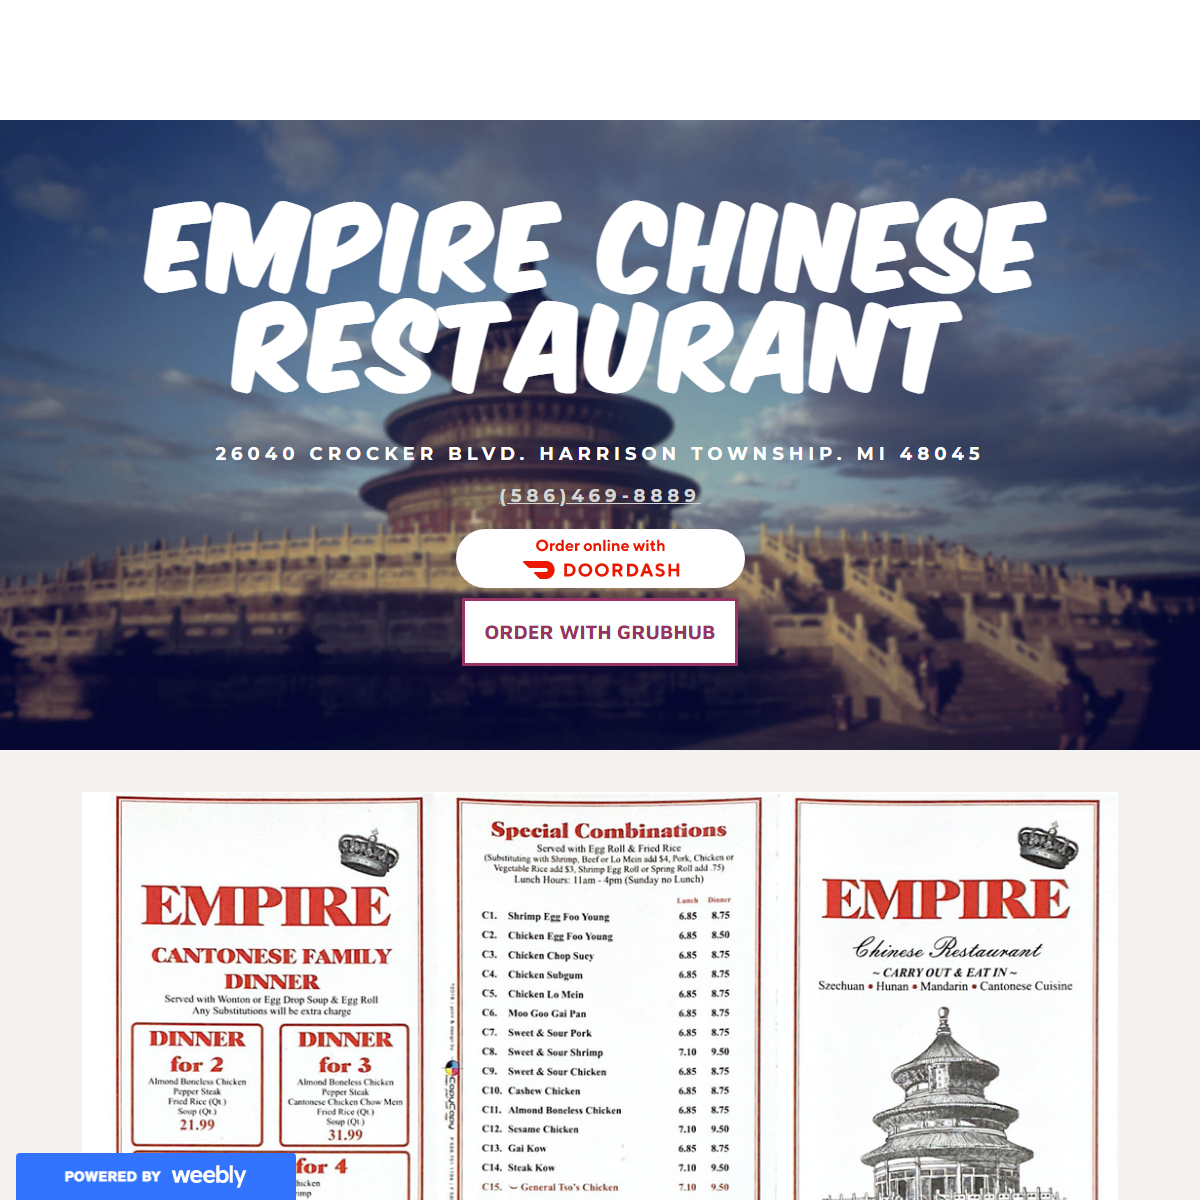 A complete backup of https://empirechineserest.weebly.com/